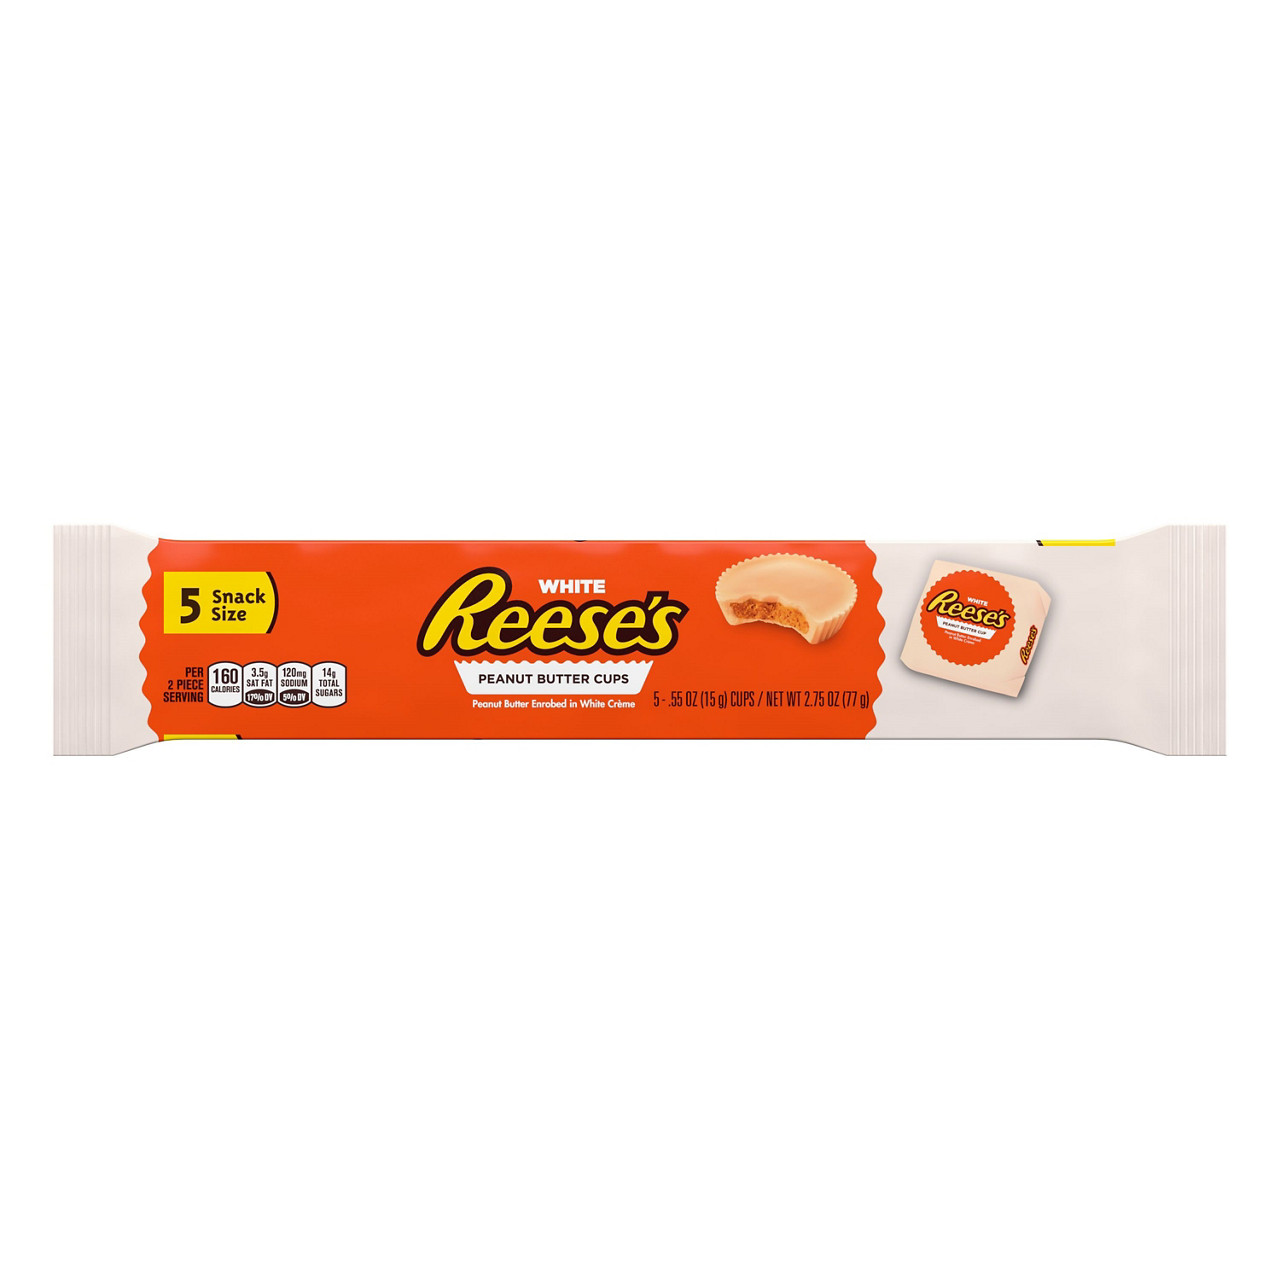 Reese's Snack Size White Crème Peanut Butter Cups, 5 Pack